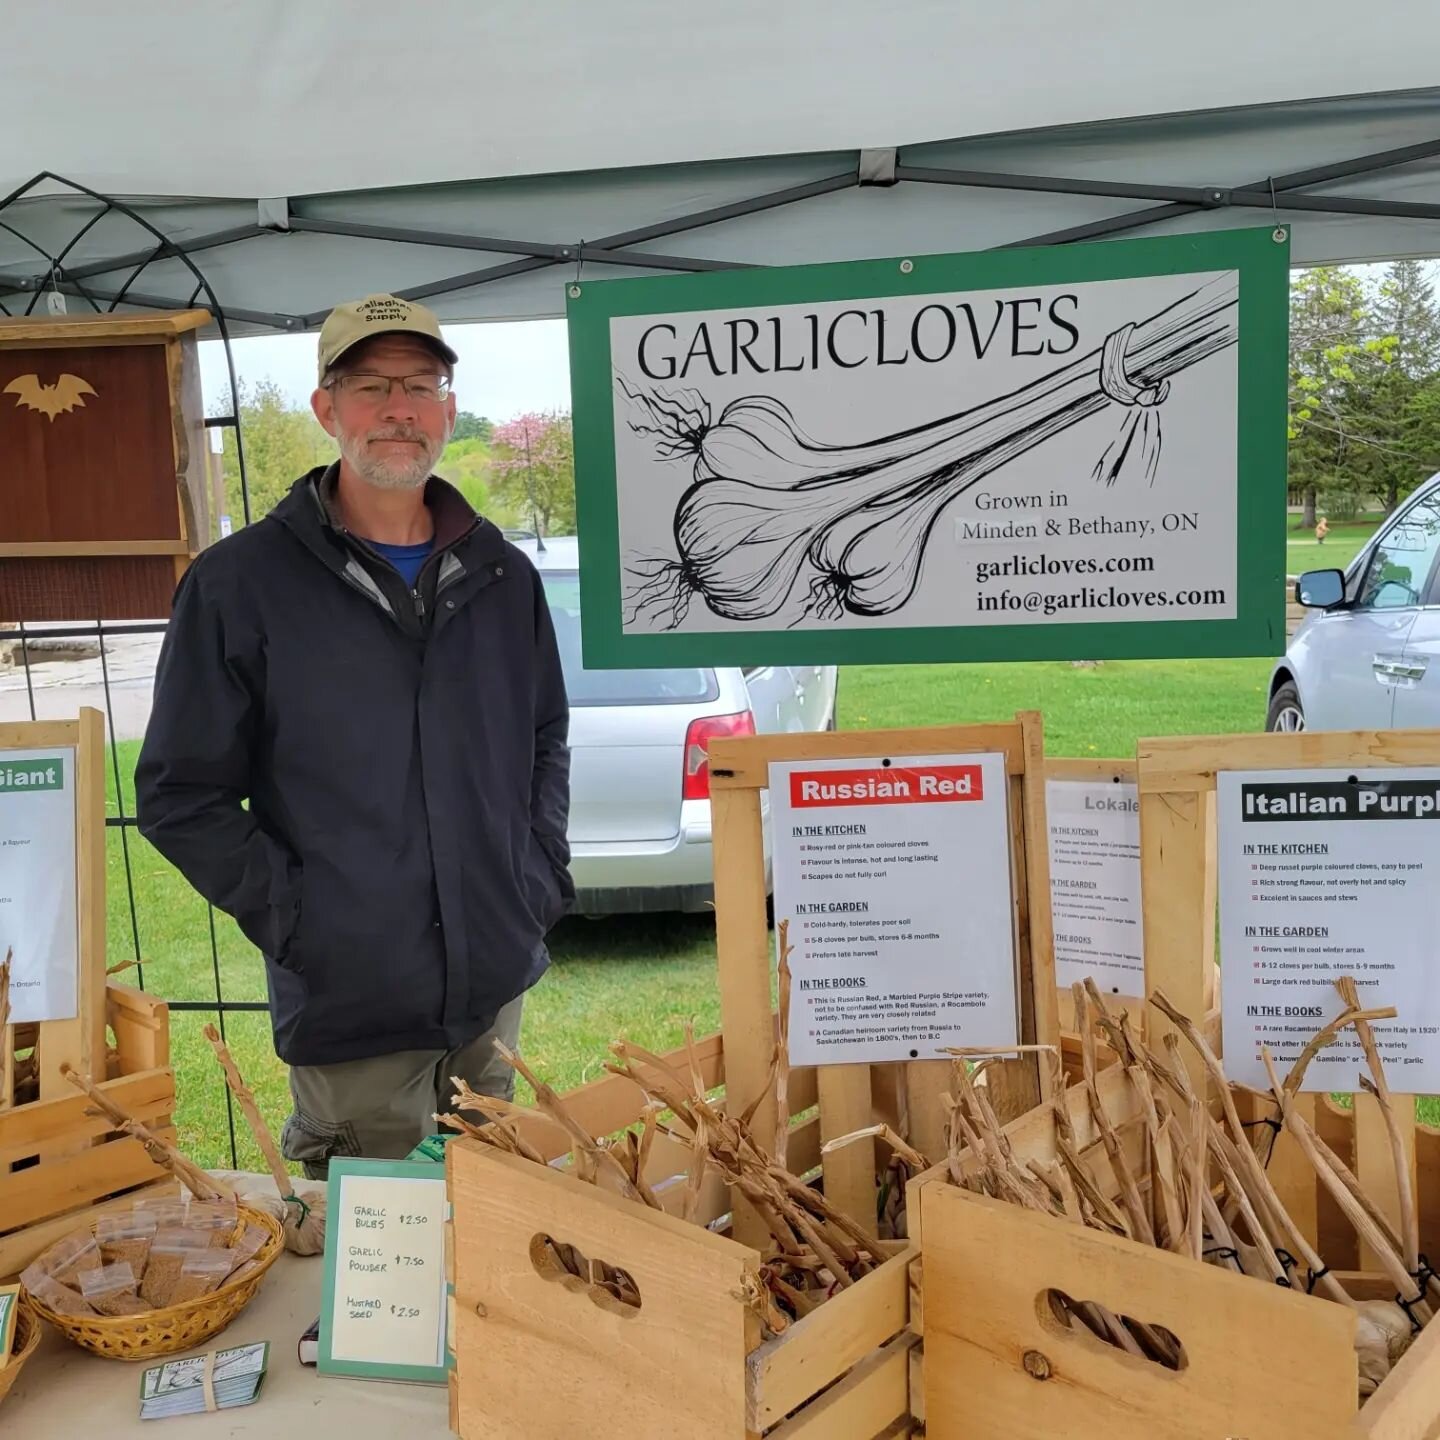 So many great new and returning vendors this year including Marchand of GARLICLOVES! If you love garlic this is your guy! He also makes the most beautiful bat houses out of upcycled furniture! Could he be any cooler? 
.
.
.
.
#garlicloves #lovegarlic